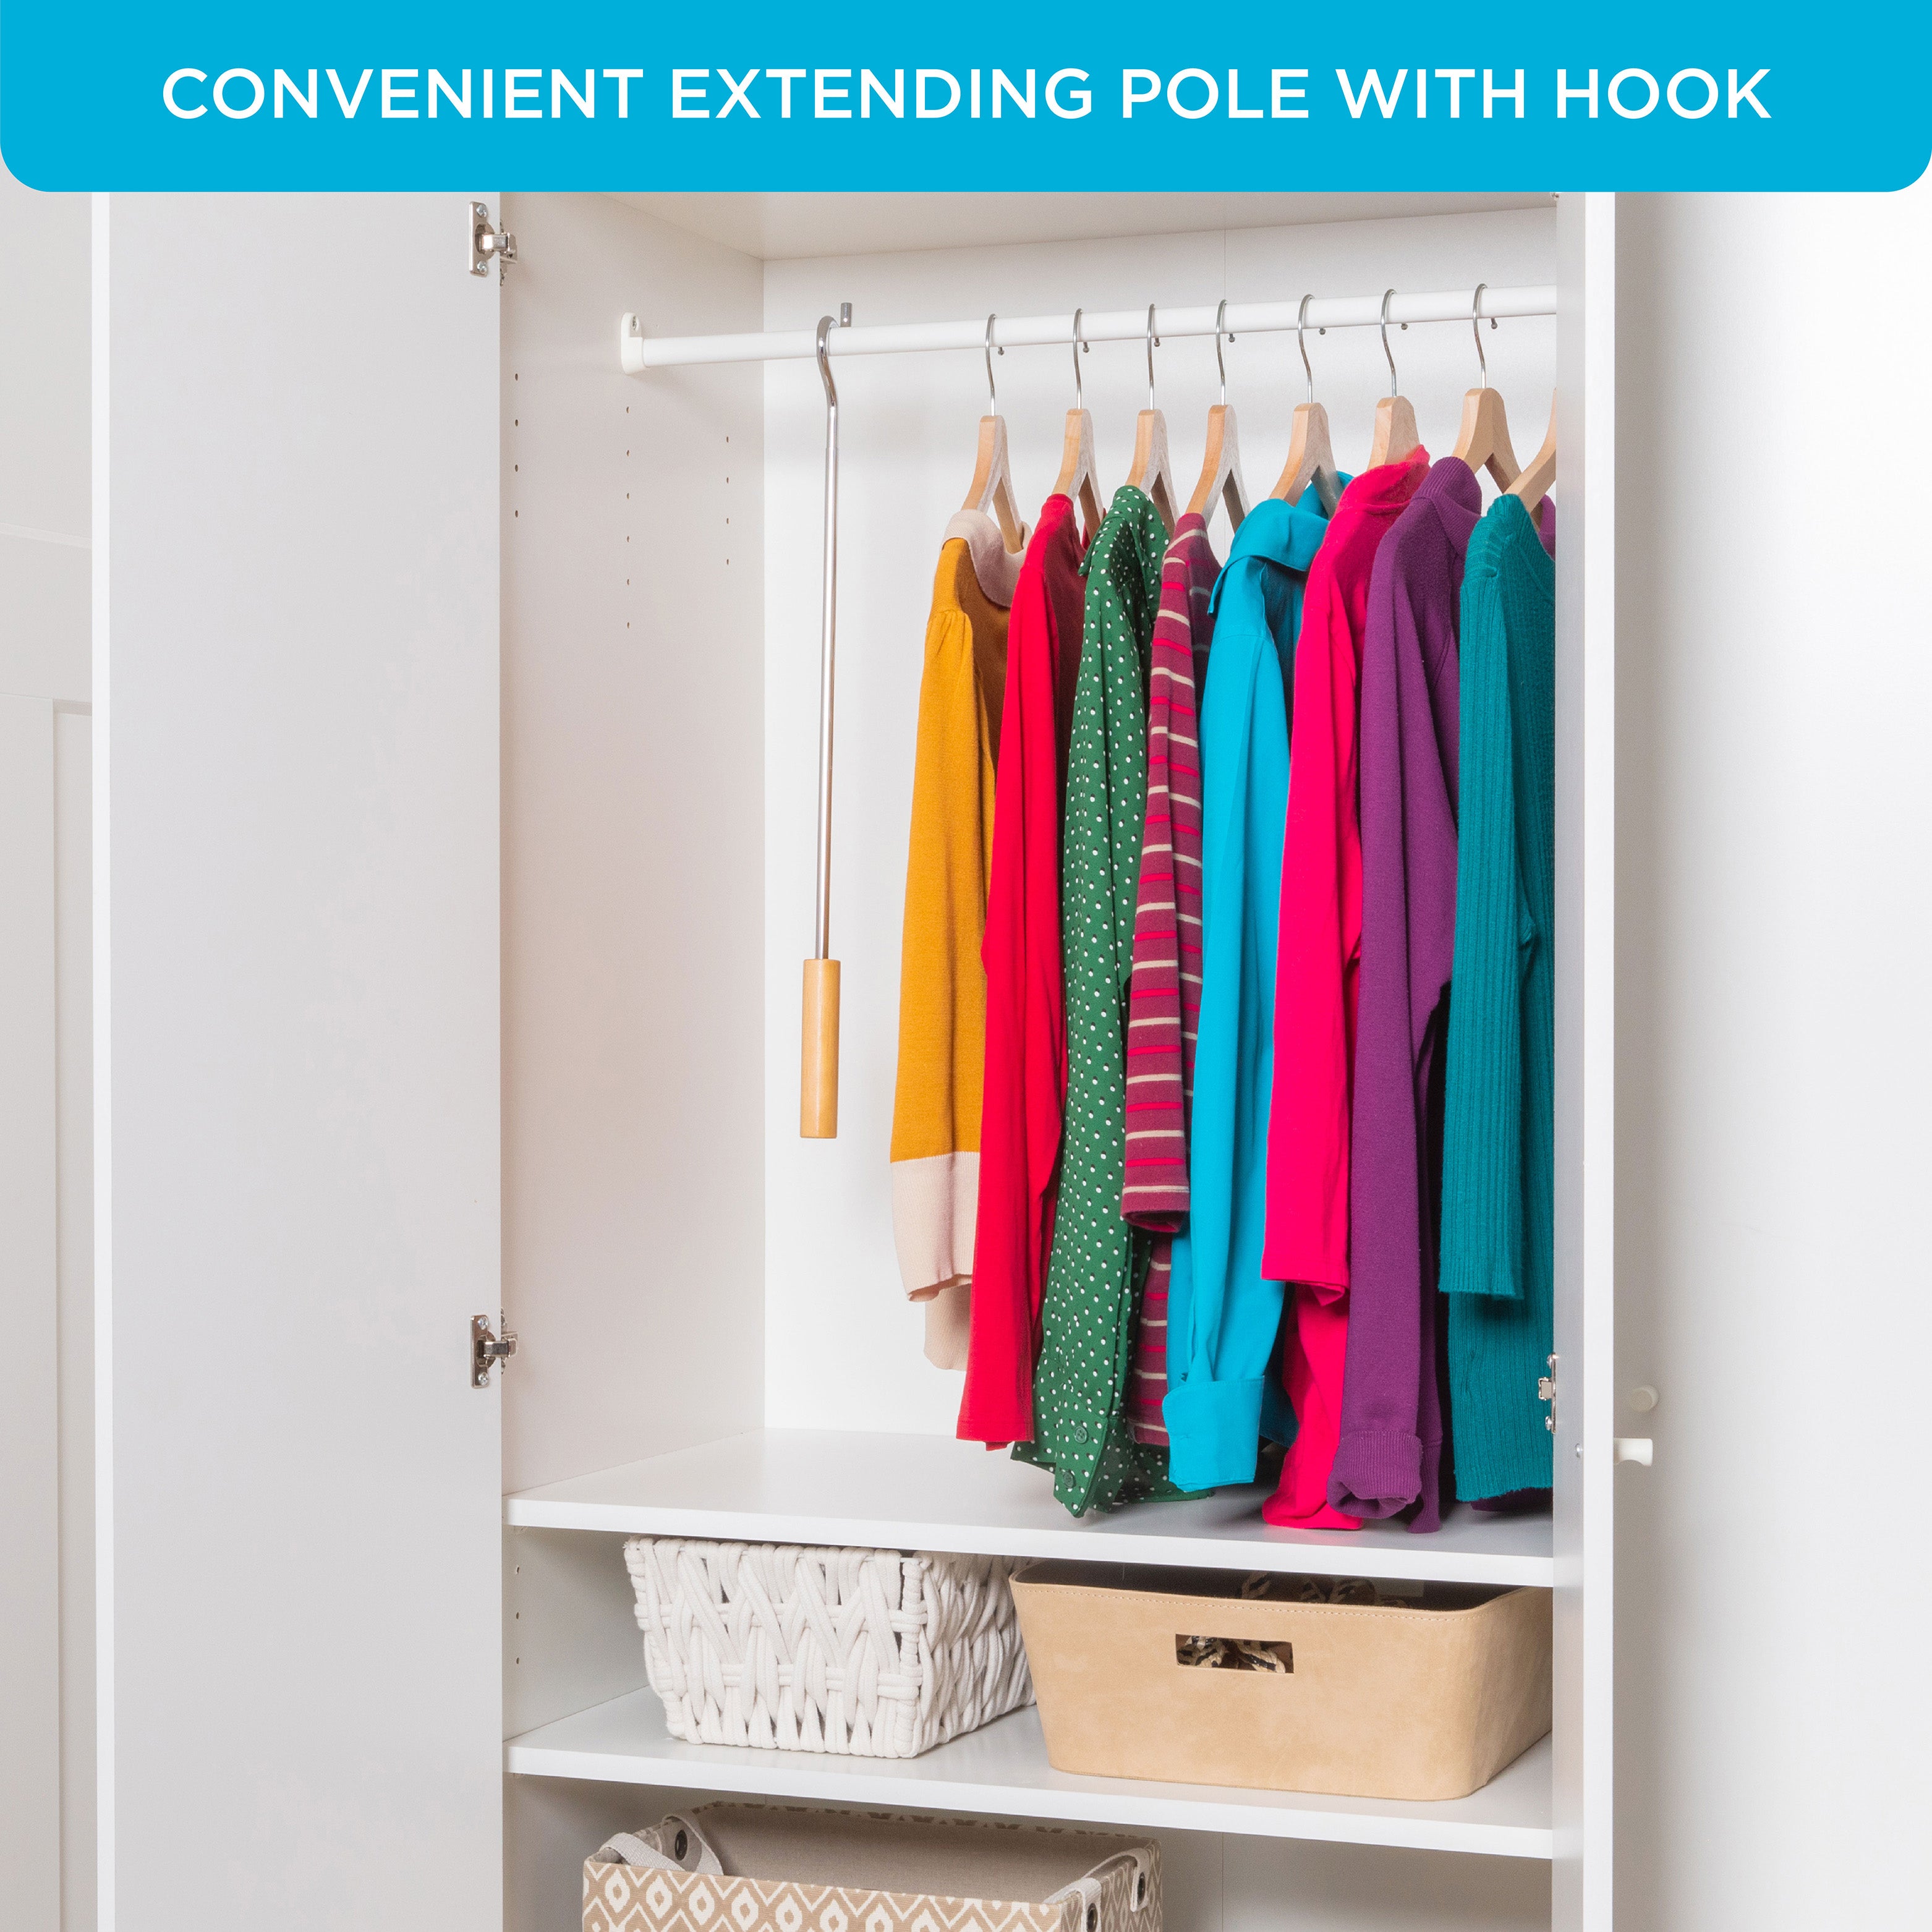 Closet Reacher Pole with Hook and Wooden Handle, Heavy Duty - Adjustable 2.75 – 5 Feet, Chrome Plated Steel Clothing Hanger Shepherds Hook to Easily Reach Clothes etc. - Perfect for College Dorm